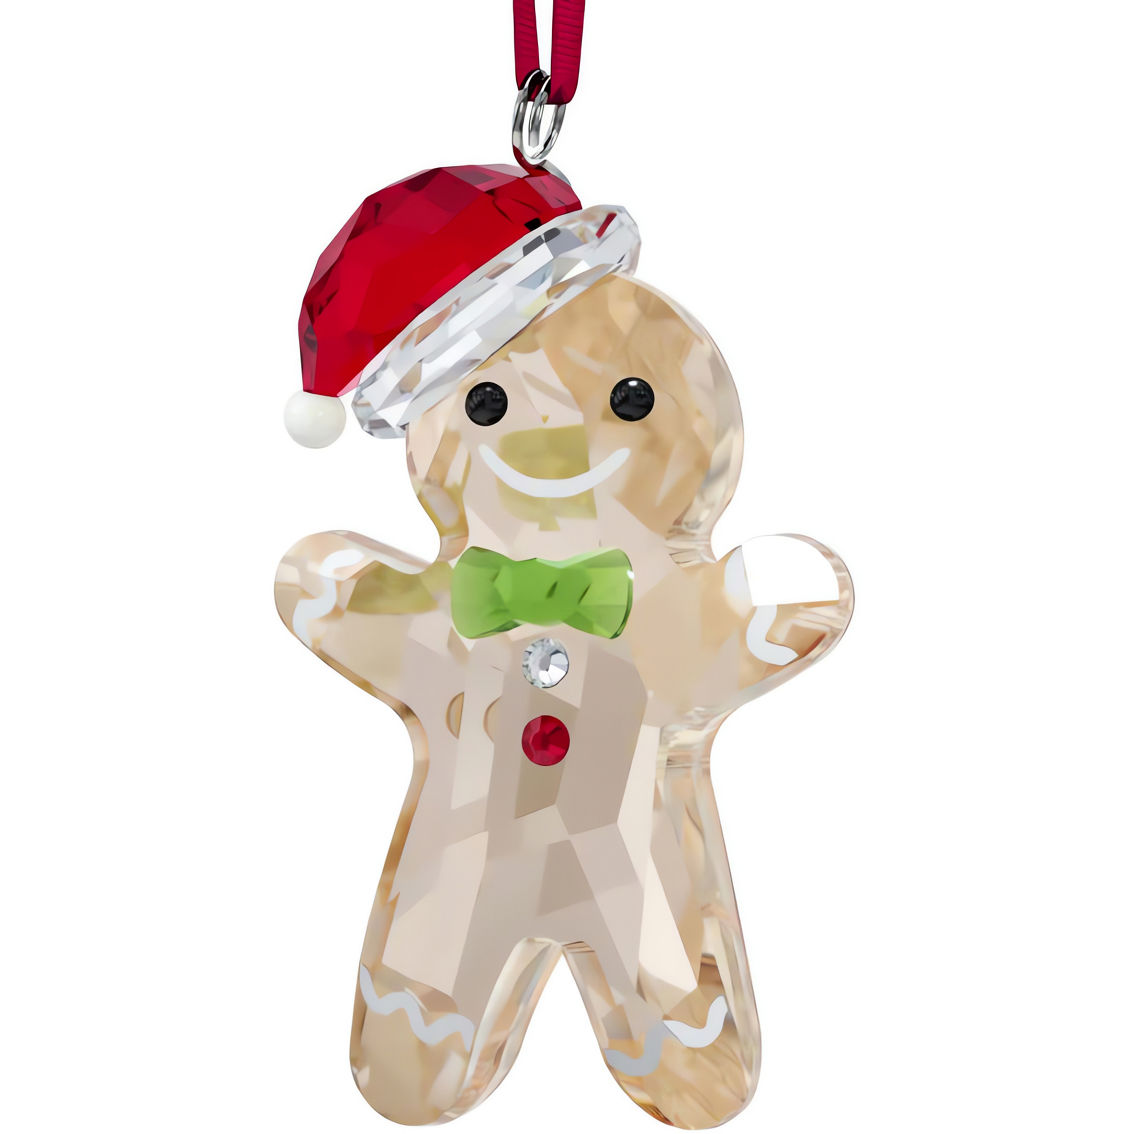 Holiday Cheers Gingerbread Man Ornament - Image 4 of 7